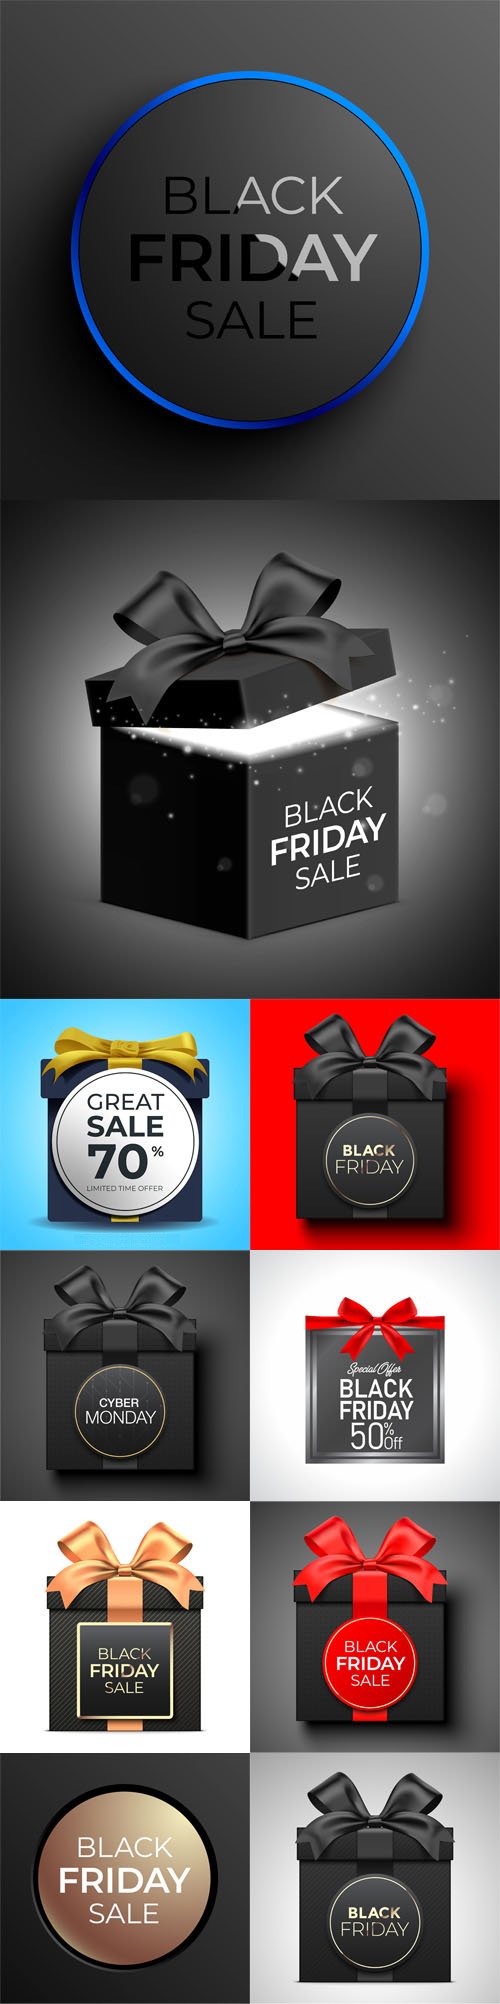 Black Friday - 10+ Realistic Gift Boxes Vector Templates